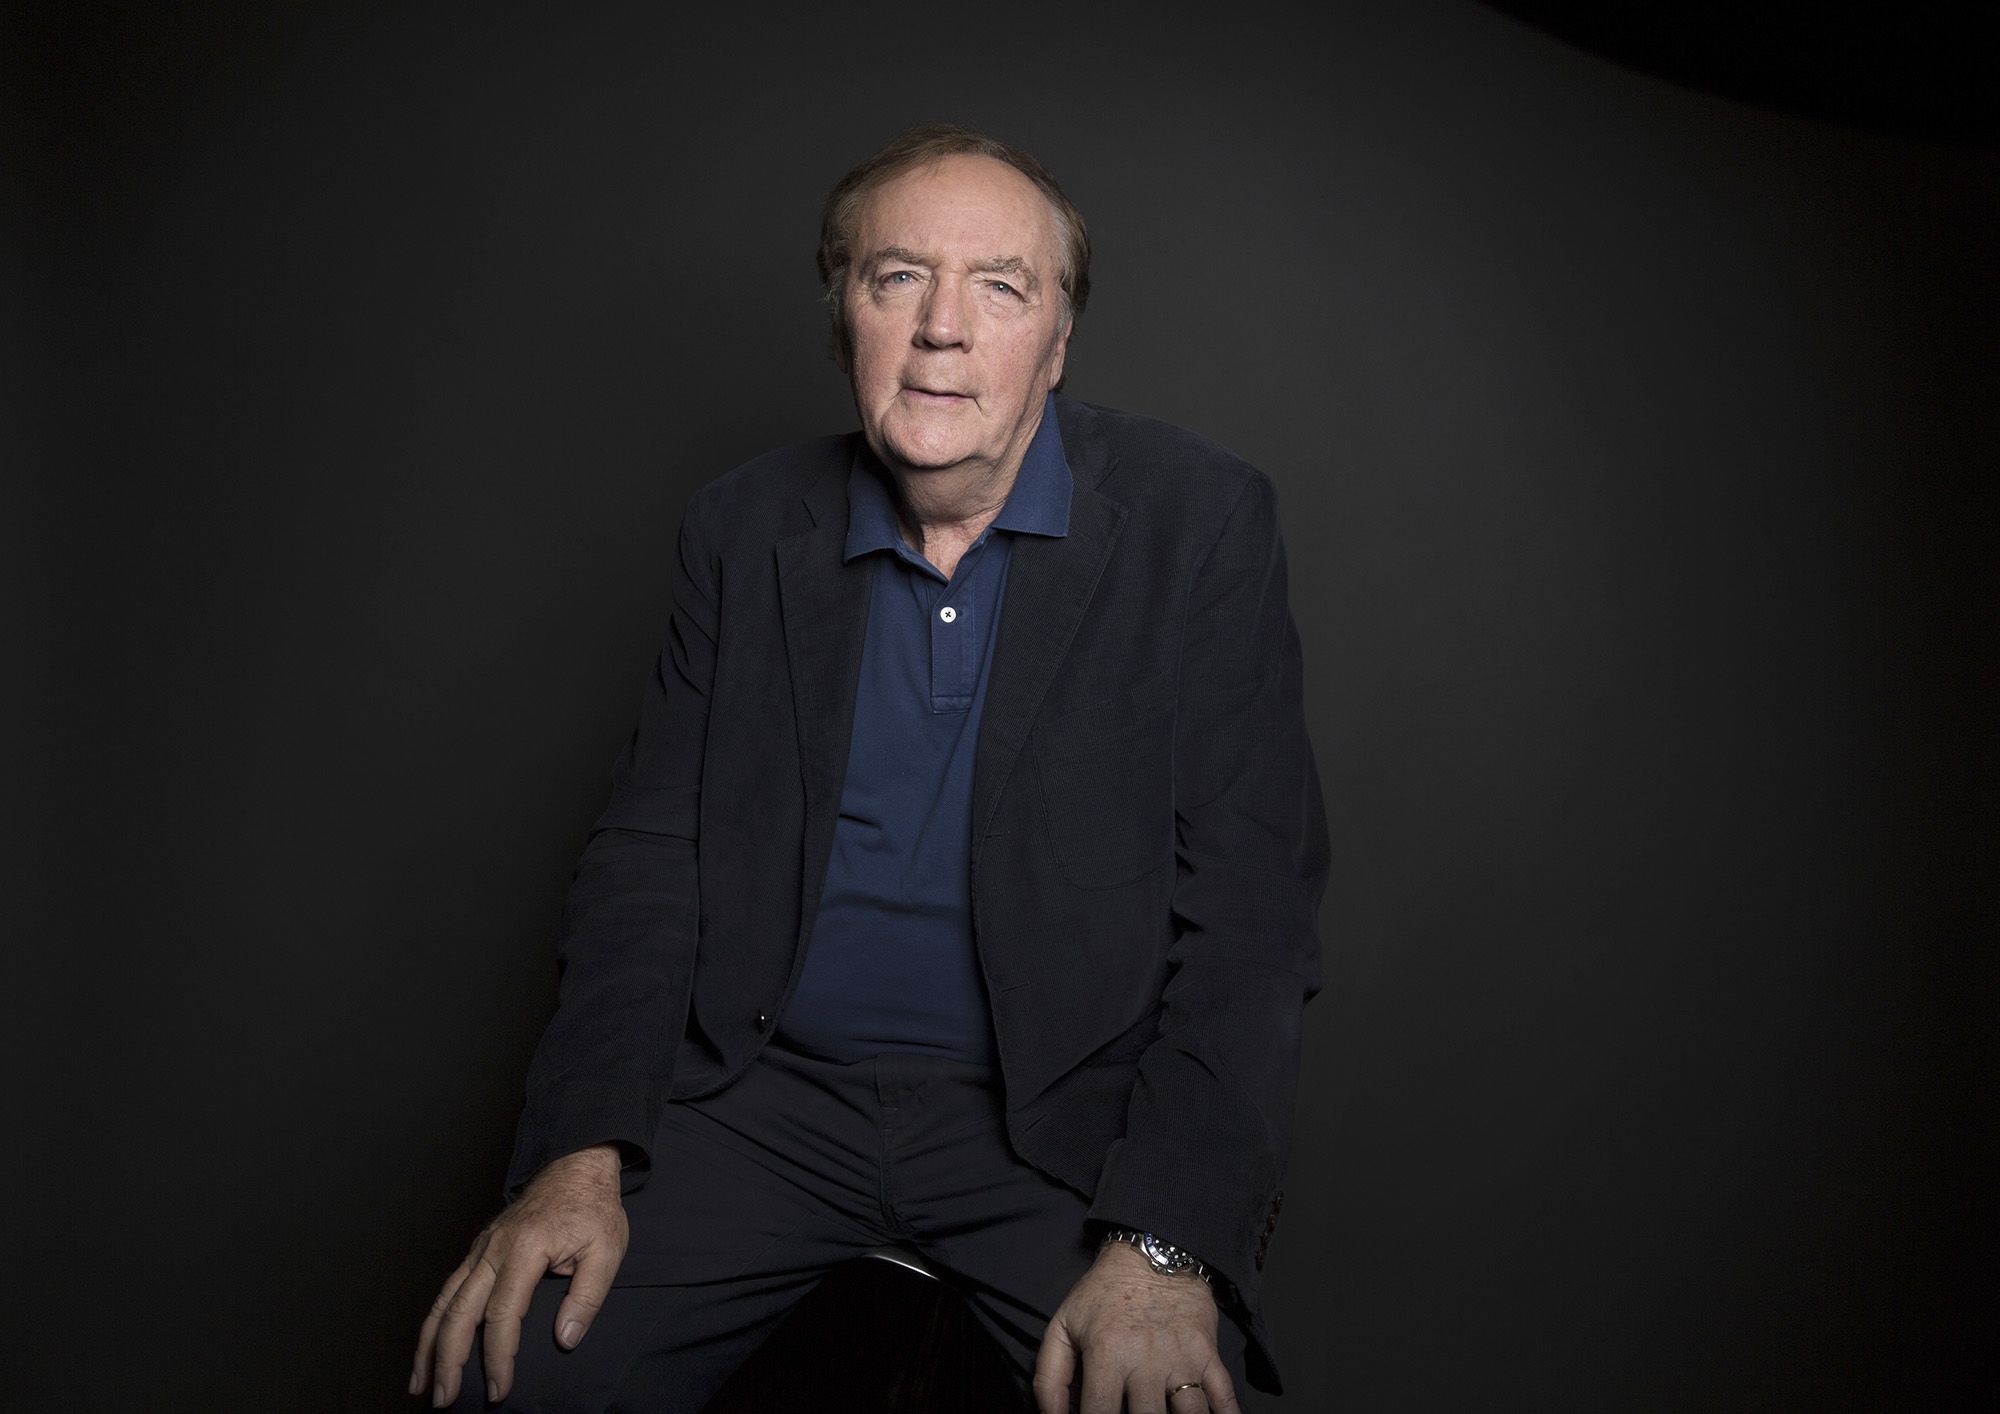 James Patterson apologizes for saying White men don't get writing